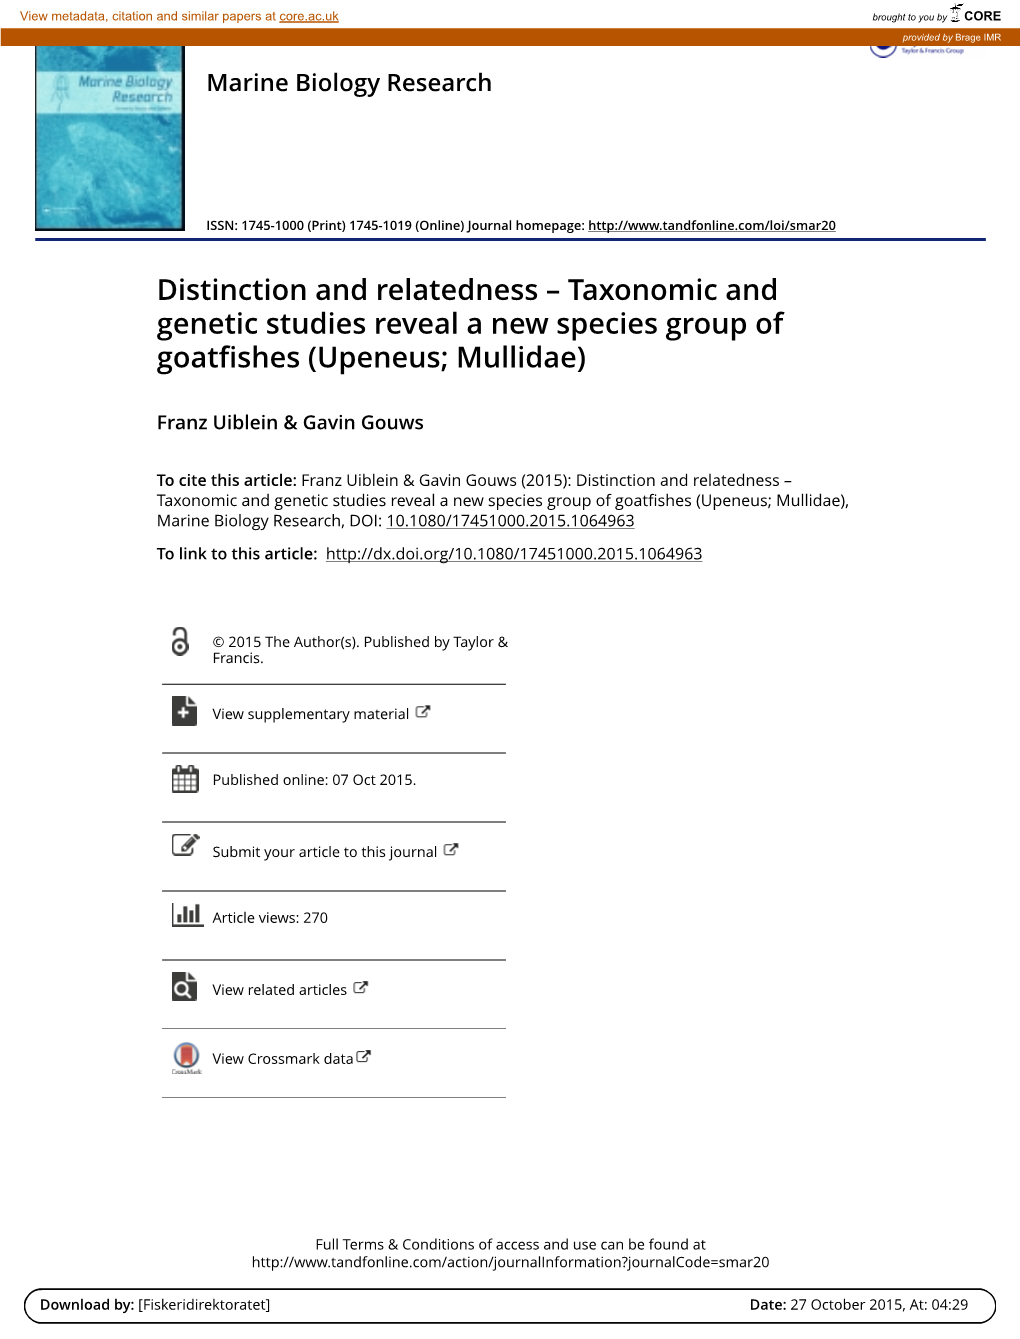 Distinction and Relatedness – Taxonomic and Genetic Studies Reveal a New Species Group of Goatfishes (Upeneus; Mullidae)